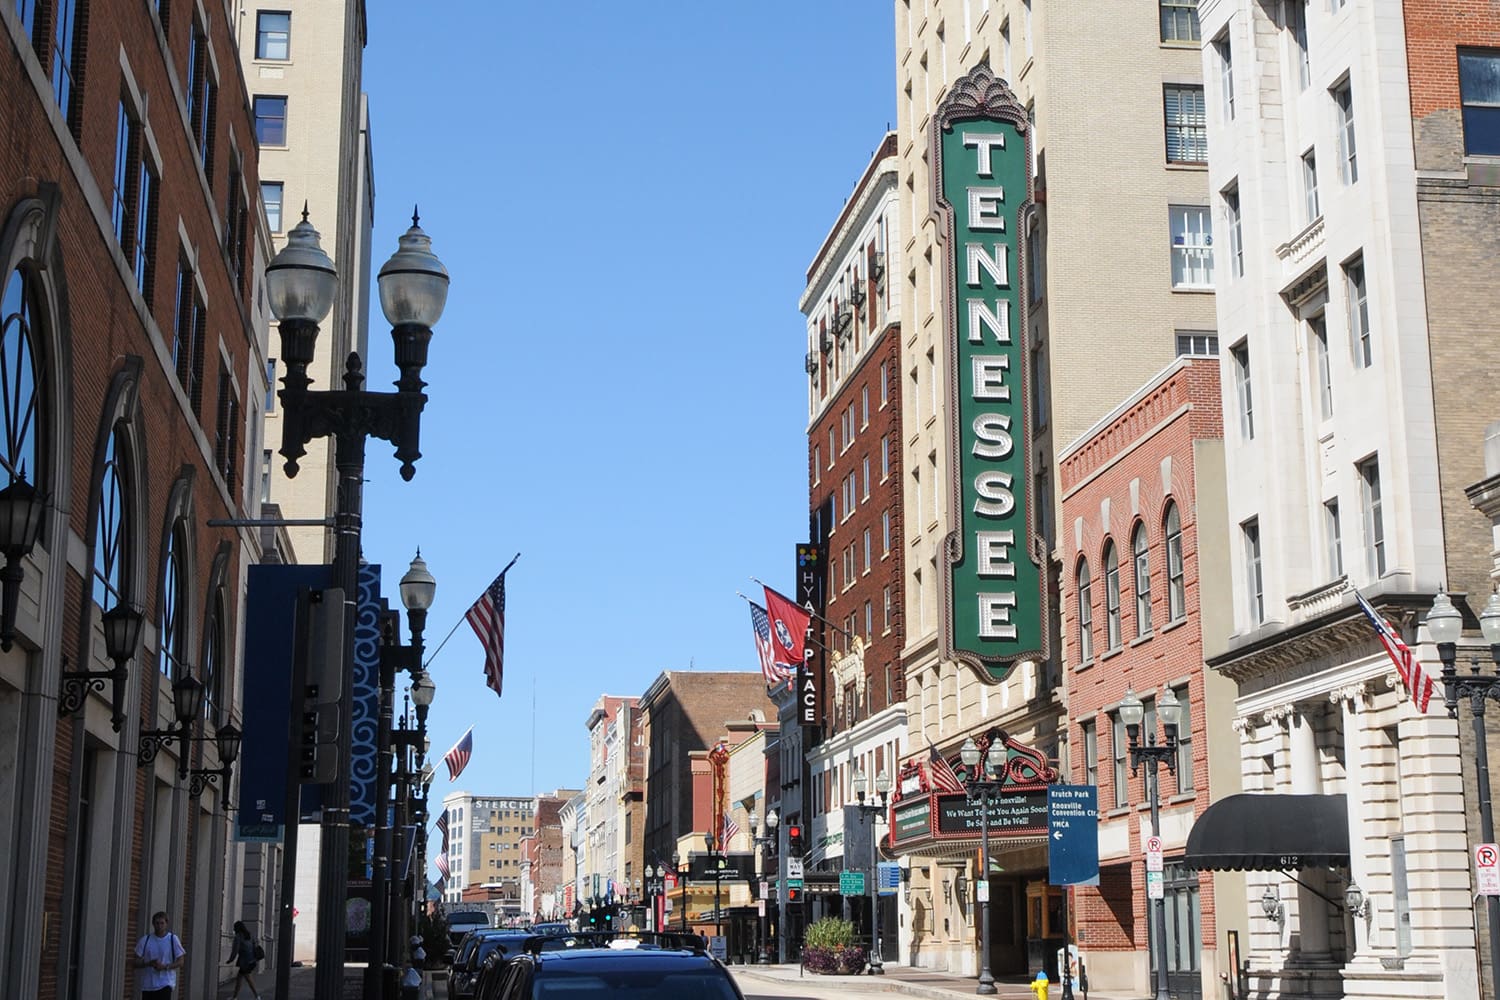 Tennessee Theatre sign in downtown Knoxville